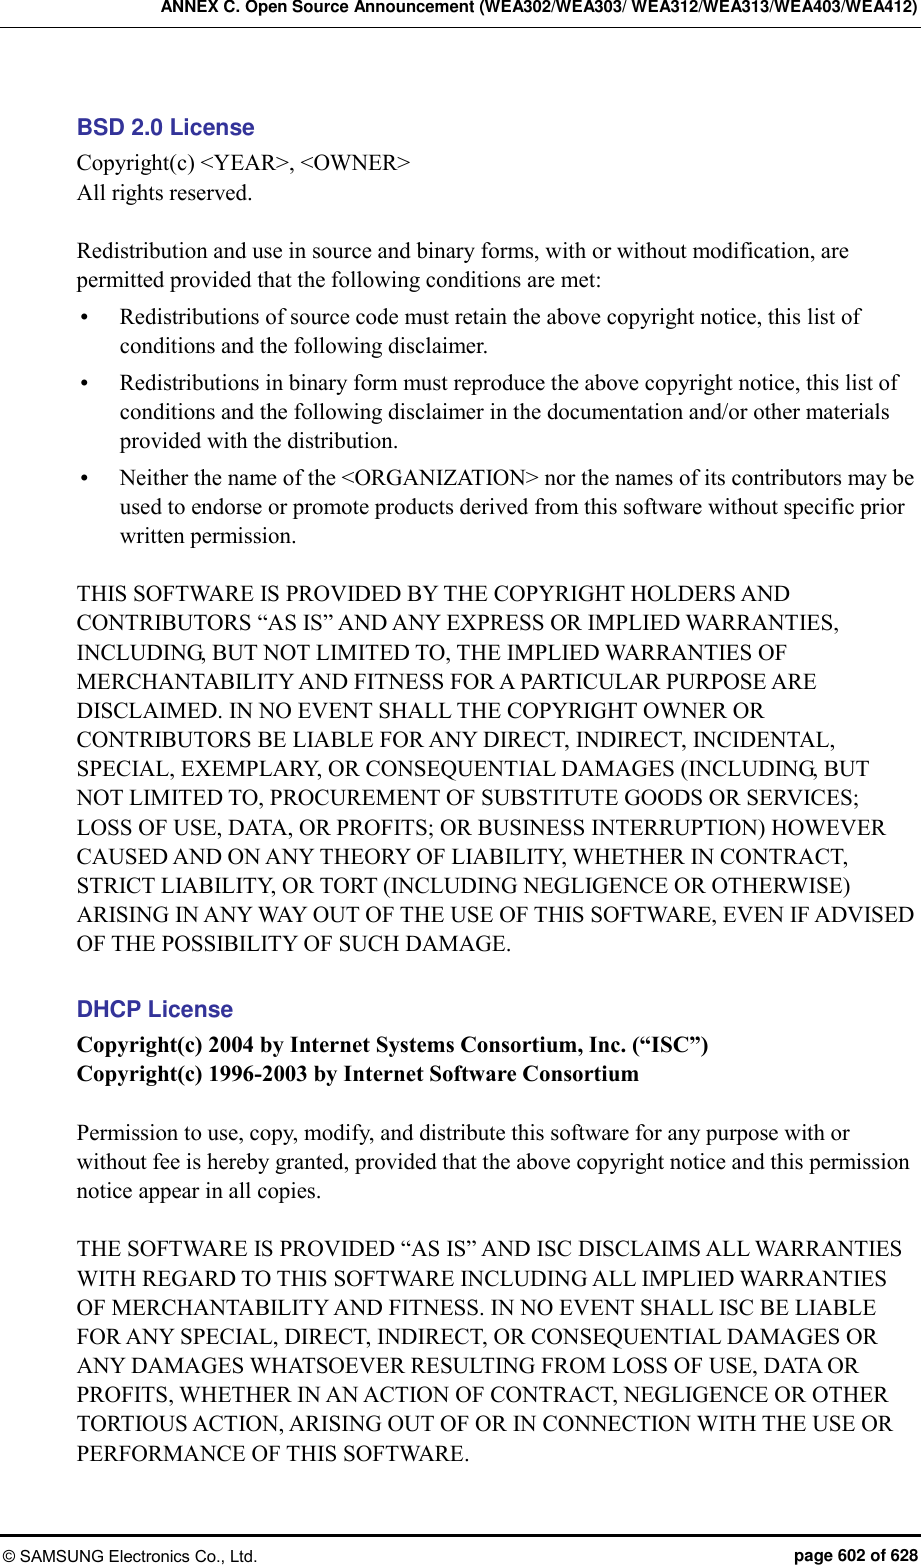 ANNEX C. Open Source Announcement (WEA302/WEA303/ WEA312/WEA313/WEA403/WEA412) © SAMSUNG Electronics Co., Ltd.  page 602 of 628 BSD 2.0 License Copyright(c) &lt;YEAR&gt;, &lt;OWNER&gt; All rights reserved.  Redistribution and use in source and binary forms, with or without modification, are permitted provided that the following conditions are met:    Redistributions of source code must retain the above copyright notice, this list of conditions and the following disclaimer.    Redistributions in binary form must reproduce the above copyright notice, this list of conditions and the following disclaimer in the documentation and/or other materials provided with the distribution.    Neither the name of the &lt;ORGANIZATION&gt; nor the names of its contributors may be used to endorse or promote products derived from this software without specific prior written permission.    THIS SOFTWARE IS PROVIDED BY THE COPYRIGHT HOLDERS AND CONTRIBUTORS “AS IS” AND ANY EXPRESS OR IMPLIED WARRANTIES, INCLUDING, BUT NOT LIMITED TO, THE IMPLIED WARRANTIES OF MERCHANTABILITY AND FITNESS FOR A PARTICULAR PURPOSE ARE DISCLAIMED. IN NO EVENT SHALL THE COPYRIGHT OWNER OR CONTRIBUTORS BE LIABLE FOR ANY DIRECT, INDIRECT, INCIDENTAL, SPECIAL, EXEMPLARY, OR CONSEQUENTIAL DAMAGES (INCLUDING, BUT NOT LIMITED TO, PROCUREMENT OF SUBSTITUTE GOODS OR SERVICES; LOSS OF USE, DATA, OR PROFITS; OR BUSINESS INTERRUPTION) HOWEVER CAUSED AND ON ANY THEORY OF LIABILITY, WHETHER IN CONTRACT, STRICT LIABILITY, OR TORT (INCLUDING NEGLIGENCE OR OTHERWISE) ARISING IN ANY WAY OUT OF THE USE OF THIS SOFTWARE, EVEN IF ADVISED OF THE POSSIBILITY OF SUCH DAMAGE.  DHCP License Copyright(c) 2004 by Internet Systems Consortium, Inc. (“ISC”) Copyright(c) 1996-2003 by Internet Software Consortium  Permission to use, copy, modify, and distribute this software for any purpose with or without fee is hereby granted, provided that the above copyright notice and this permission notice appear in all copies.  THE SOFTWARE IS PROVIDED “AS IS” AND ISC DISCLAIMS ALL WARRANTIES WITH REGARD TO THIS SOFTWARE INCLUDING ALL IMPLIED WARRANTIES OF MERCHANTABILITY AND FITNESS. IN NO EVENT SHALL ISC BE LIABLE FOR ANY SPECIAL, DIRECT, INDIRECT, OR CONSEQUENTIAL DAMAGES OR ANY DAMAGES WHATSOEVER RESULTING FROM LOSS OF USE, DATA OR PROFITS, WHETHER IN AN ACTION OF CONTRACT, NEGLIGENCE OR OTHER TORTIOUS ACTION, ARISING OUT OF OR IN CONNECTION WITH THE USE OR PERFORMANCE OF THIS SOFTWARE. 